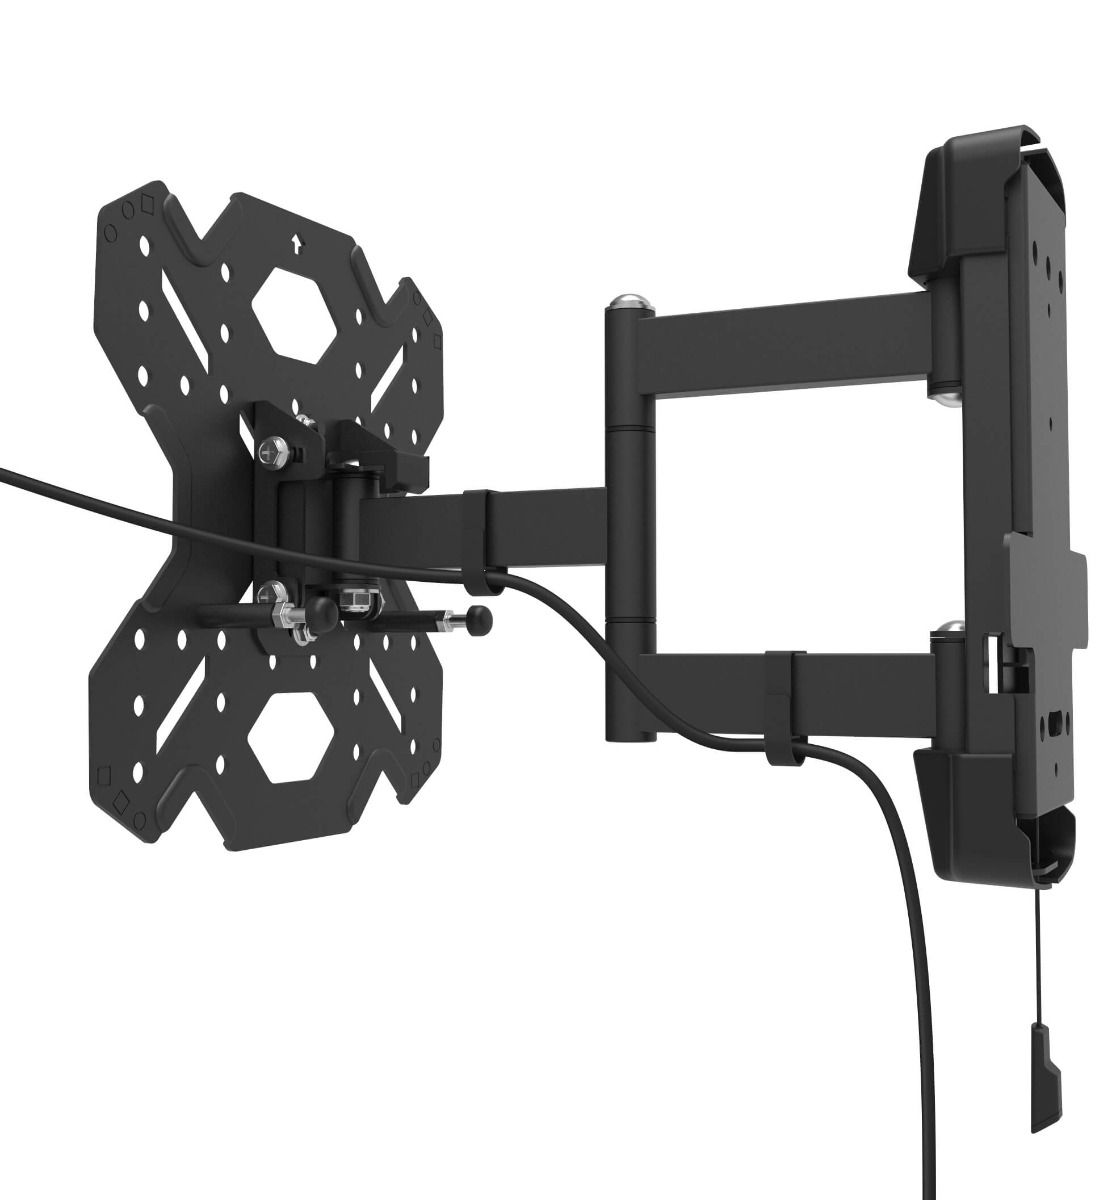 Kanto RV250G Full Motion Indoor/Outdoor TV Mount Back View with Velcro Straps for Cables